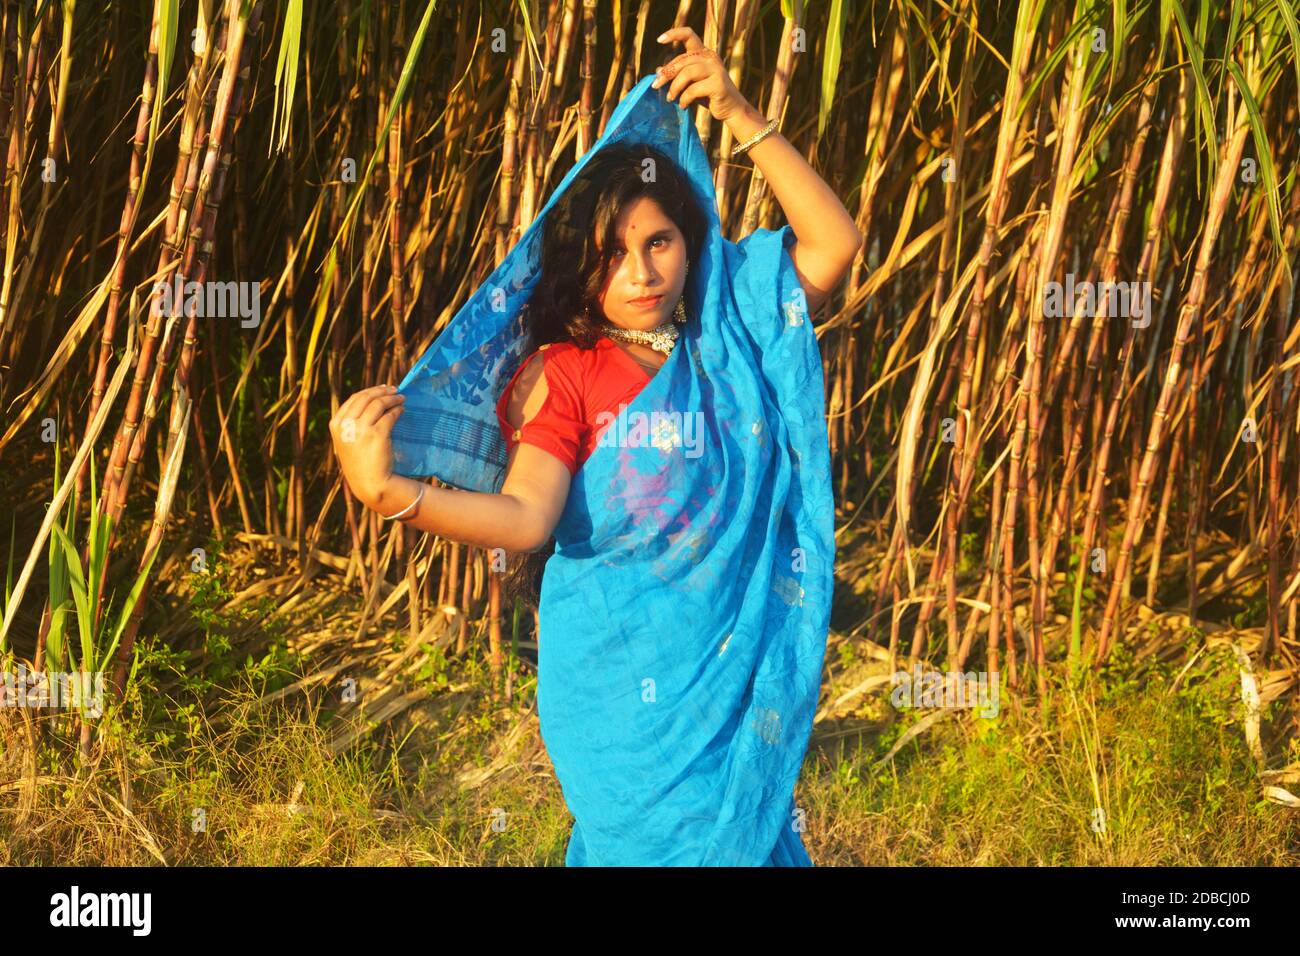 Teenage girl wearing blue saree and red blouse with golden color earrings, necklace and dark hair holding sari over head standing  on  sugarcane field Stock Photo